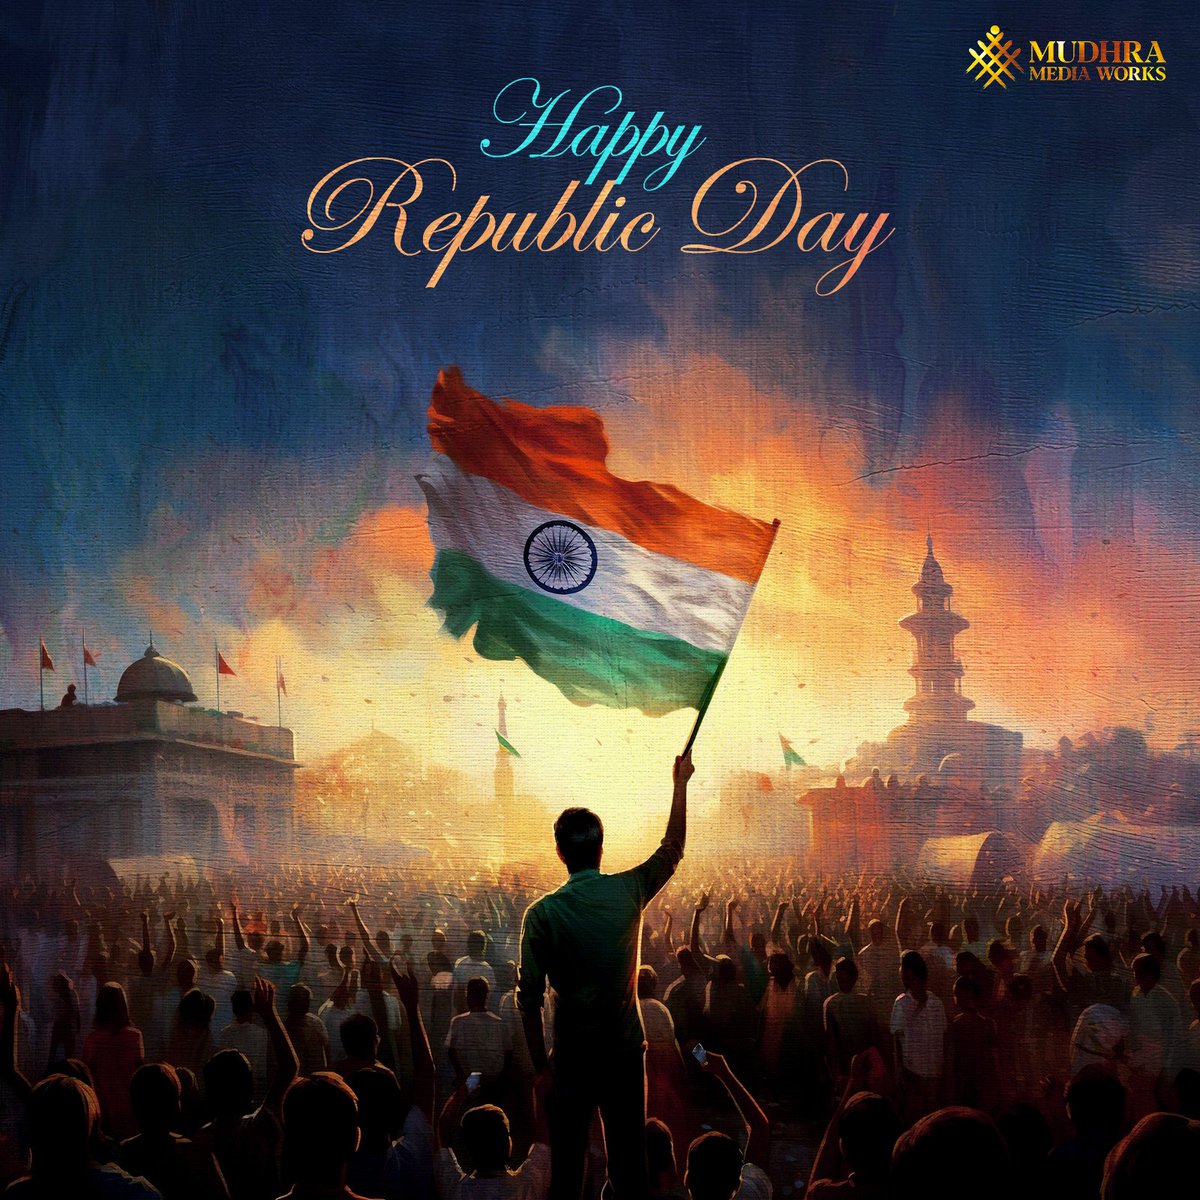 As we rejoice in the celebration of #RepublicDay, let’s renew our commitment to building a nation that stands tall in its diversity. #HappyRepublicDay 🇮🇳